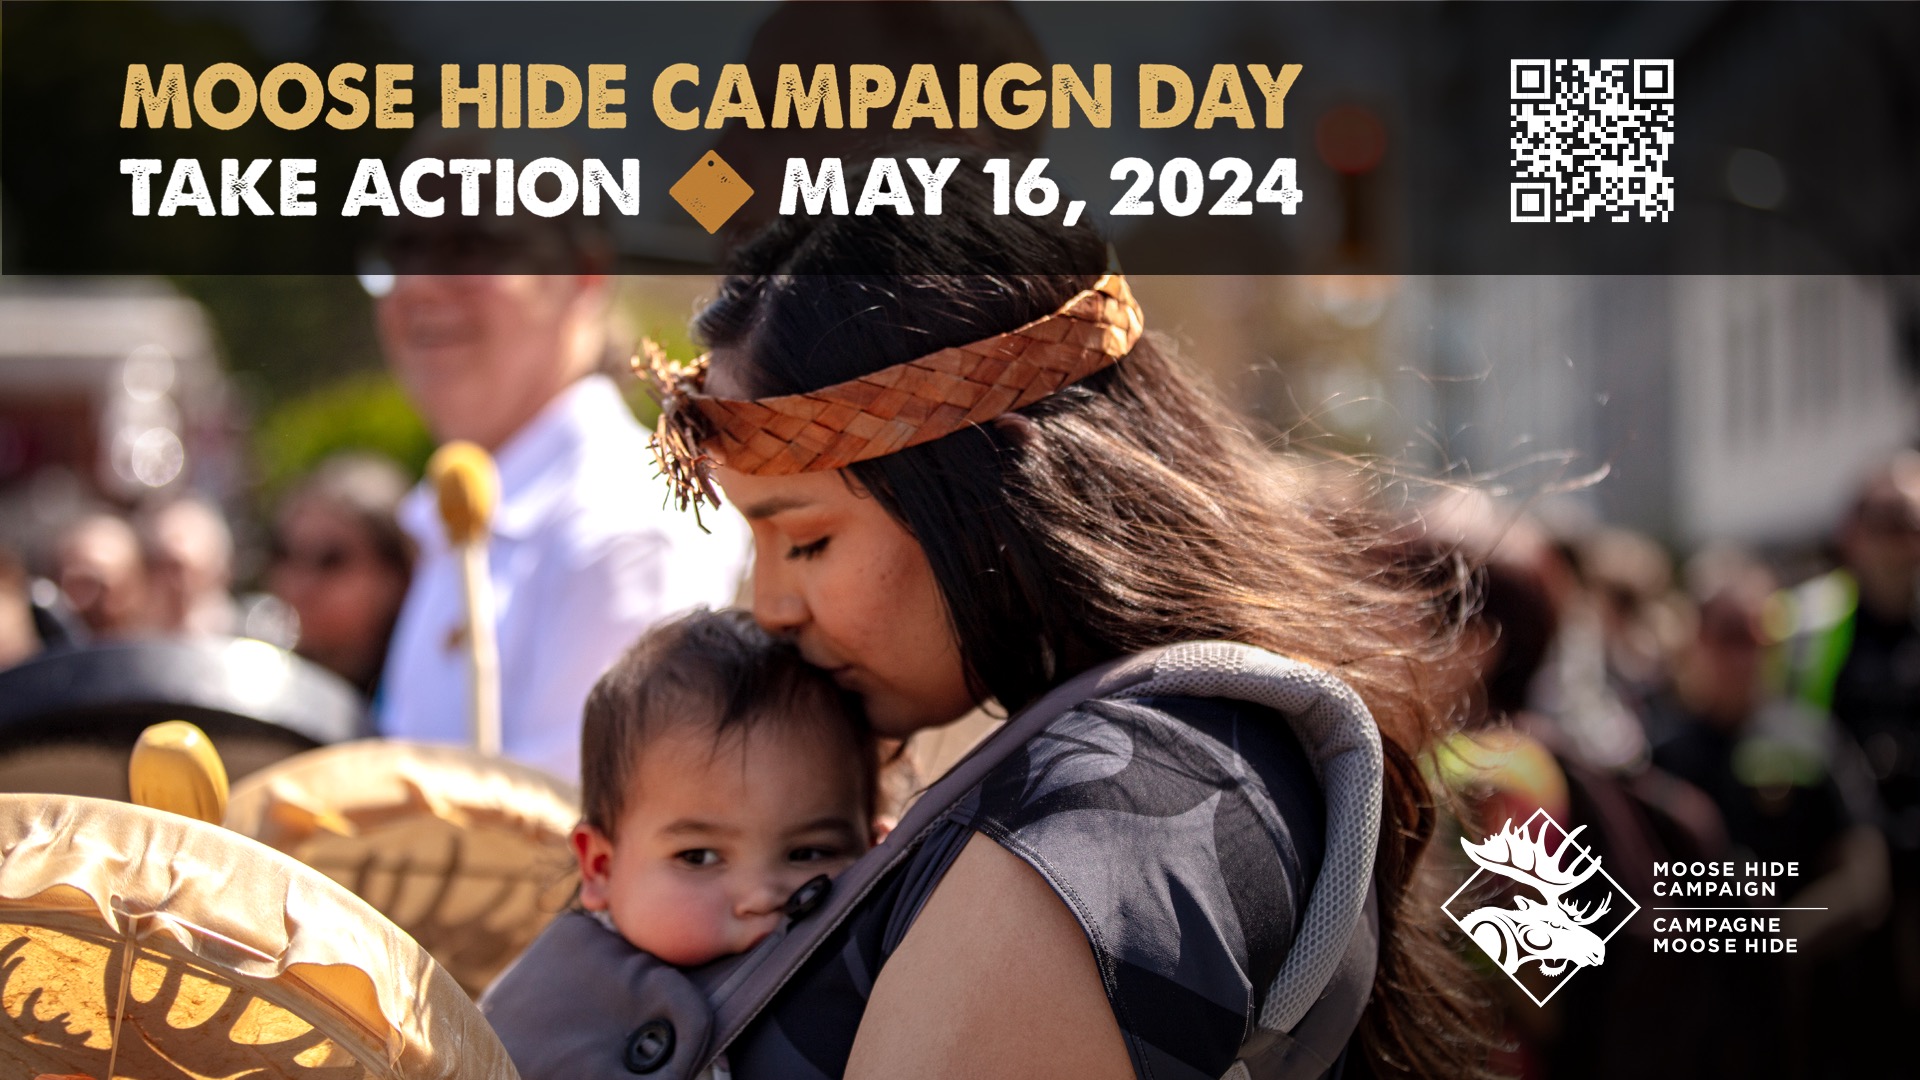 Moose Hide Campaign Day is May 16, 2024